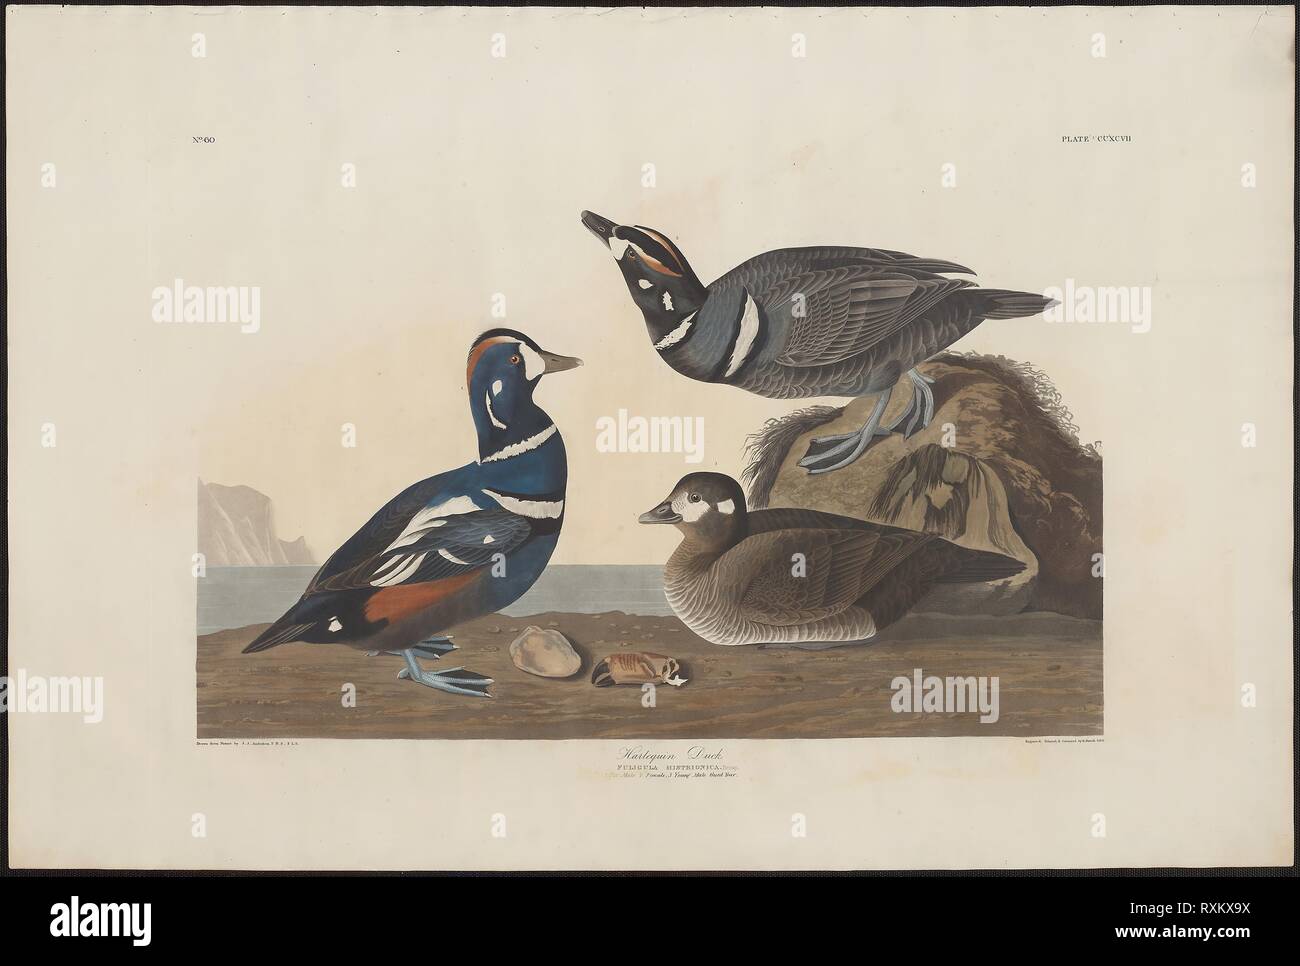 Harlequin Duck. Robert Havell (English, 1793-1878); after John James Audubon (American, 1785-1851). Date: 1825-1839. Dimensions: 525 x 717 mm (plate); 655 x 979 mm (sheet). Hand-colored engraving with aquatint and etching on ivory wove paper. Origin: United Kingdom. Museum: The Chicago Art Institute. Stock Photo